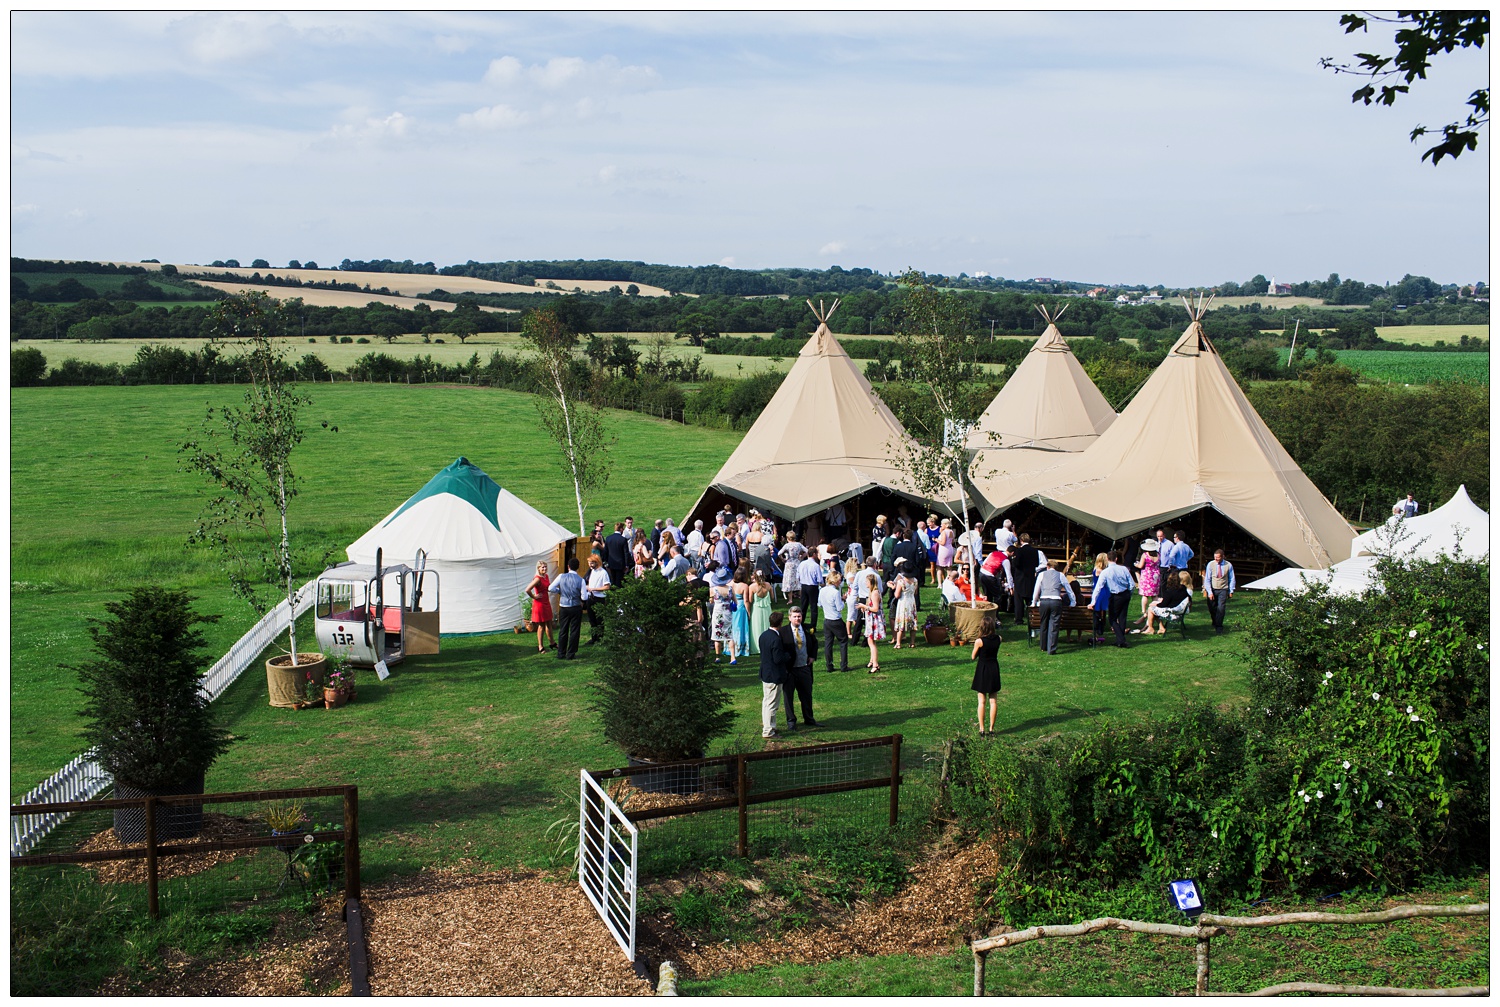 A view of a wedding Tentipi in a field, with the Essex countryside of Stow Maries in view.